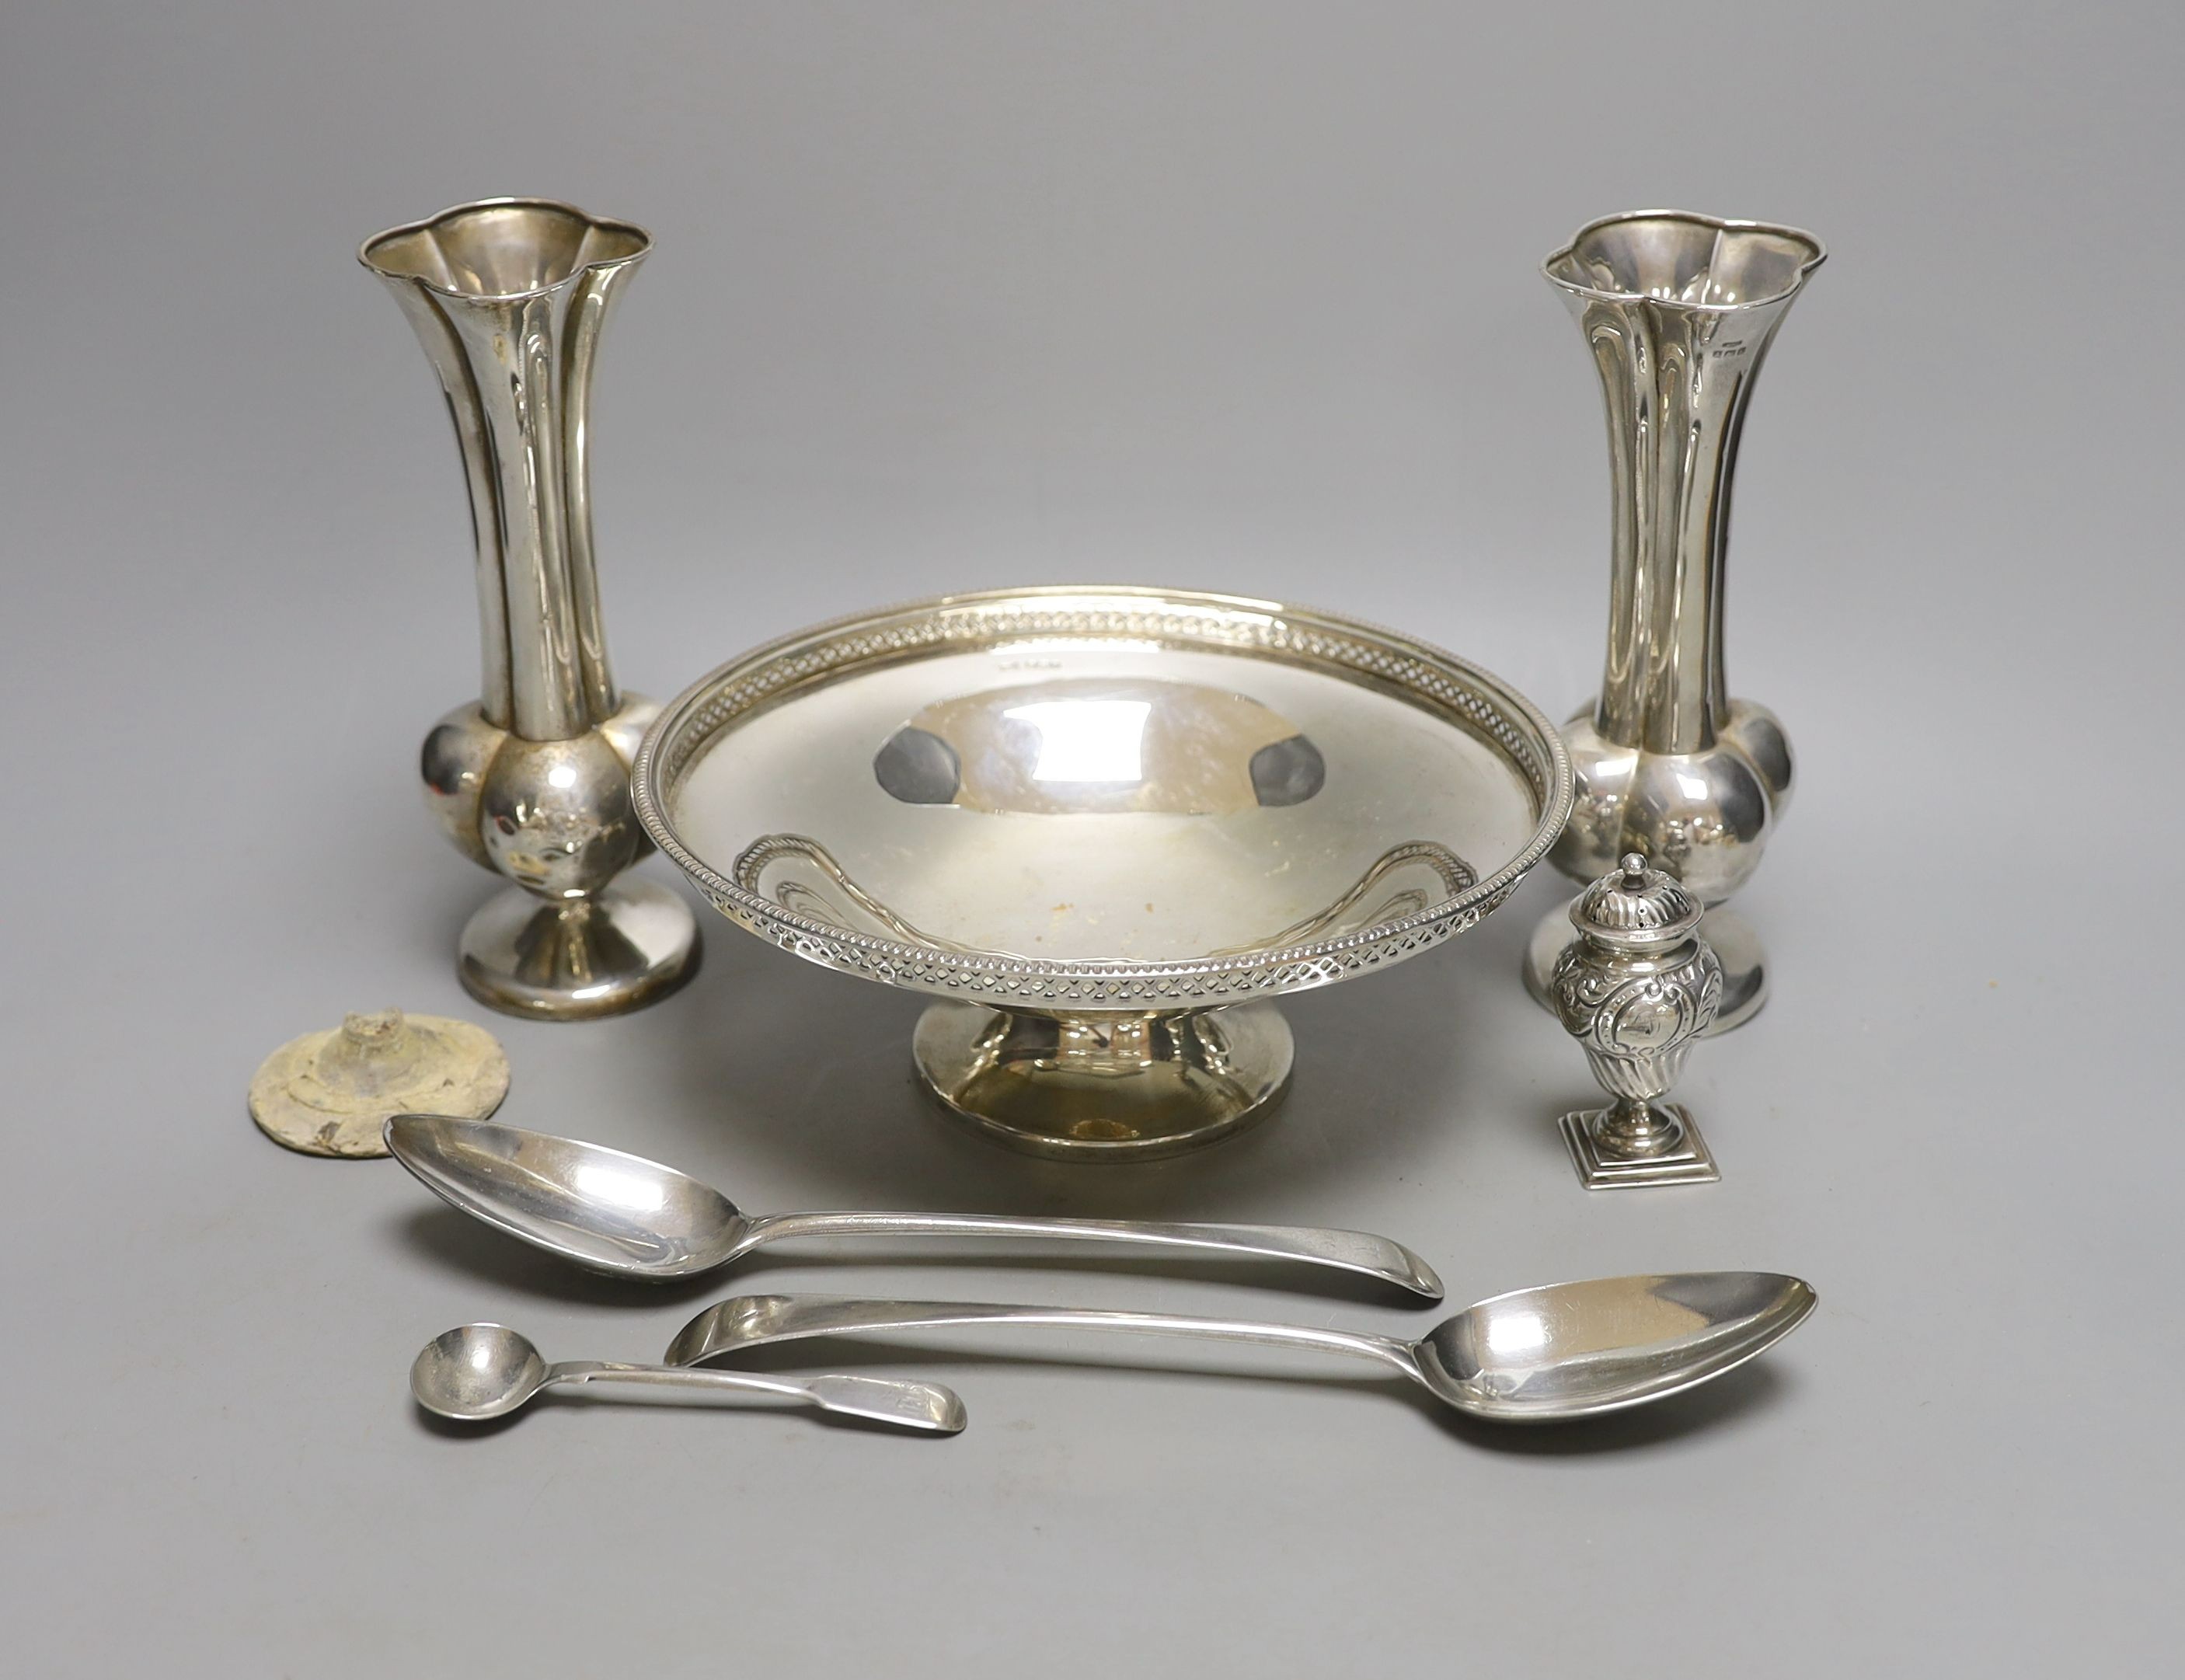 A George V silver bowl, by Walker & Hall, a pair of vases, pair of George III silver table spoons, one other spoon and a pepperette.